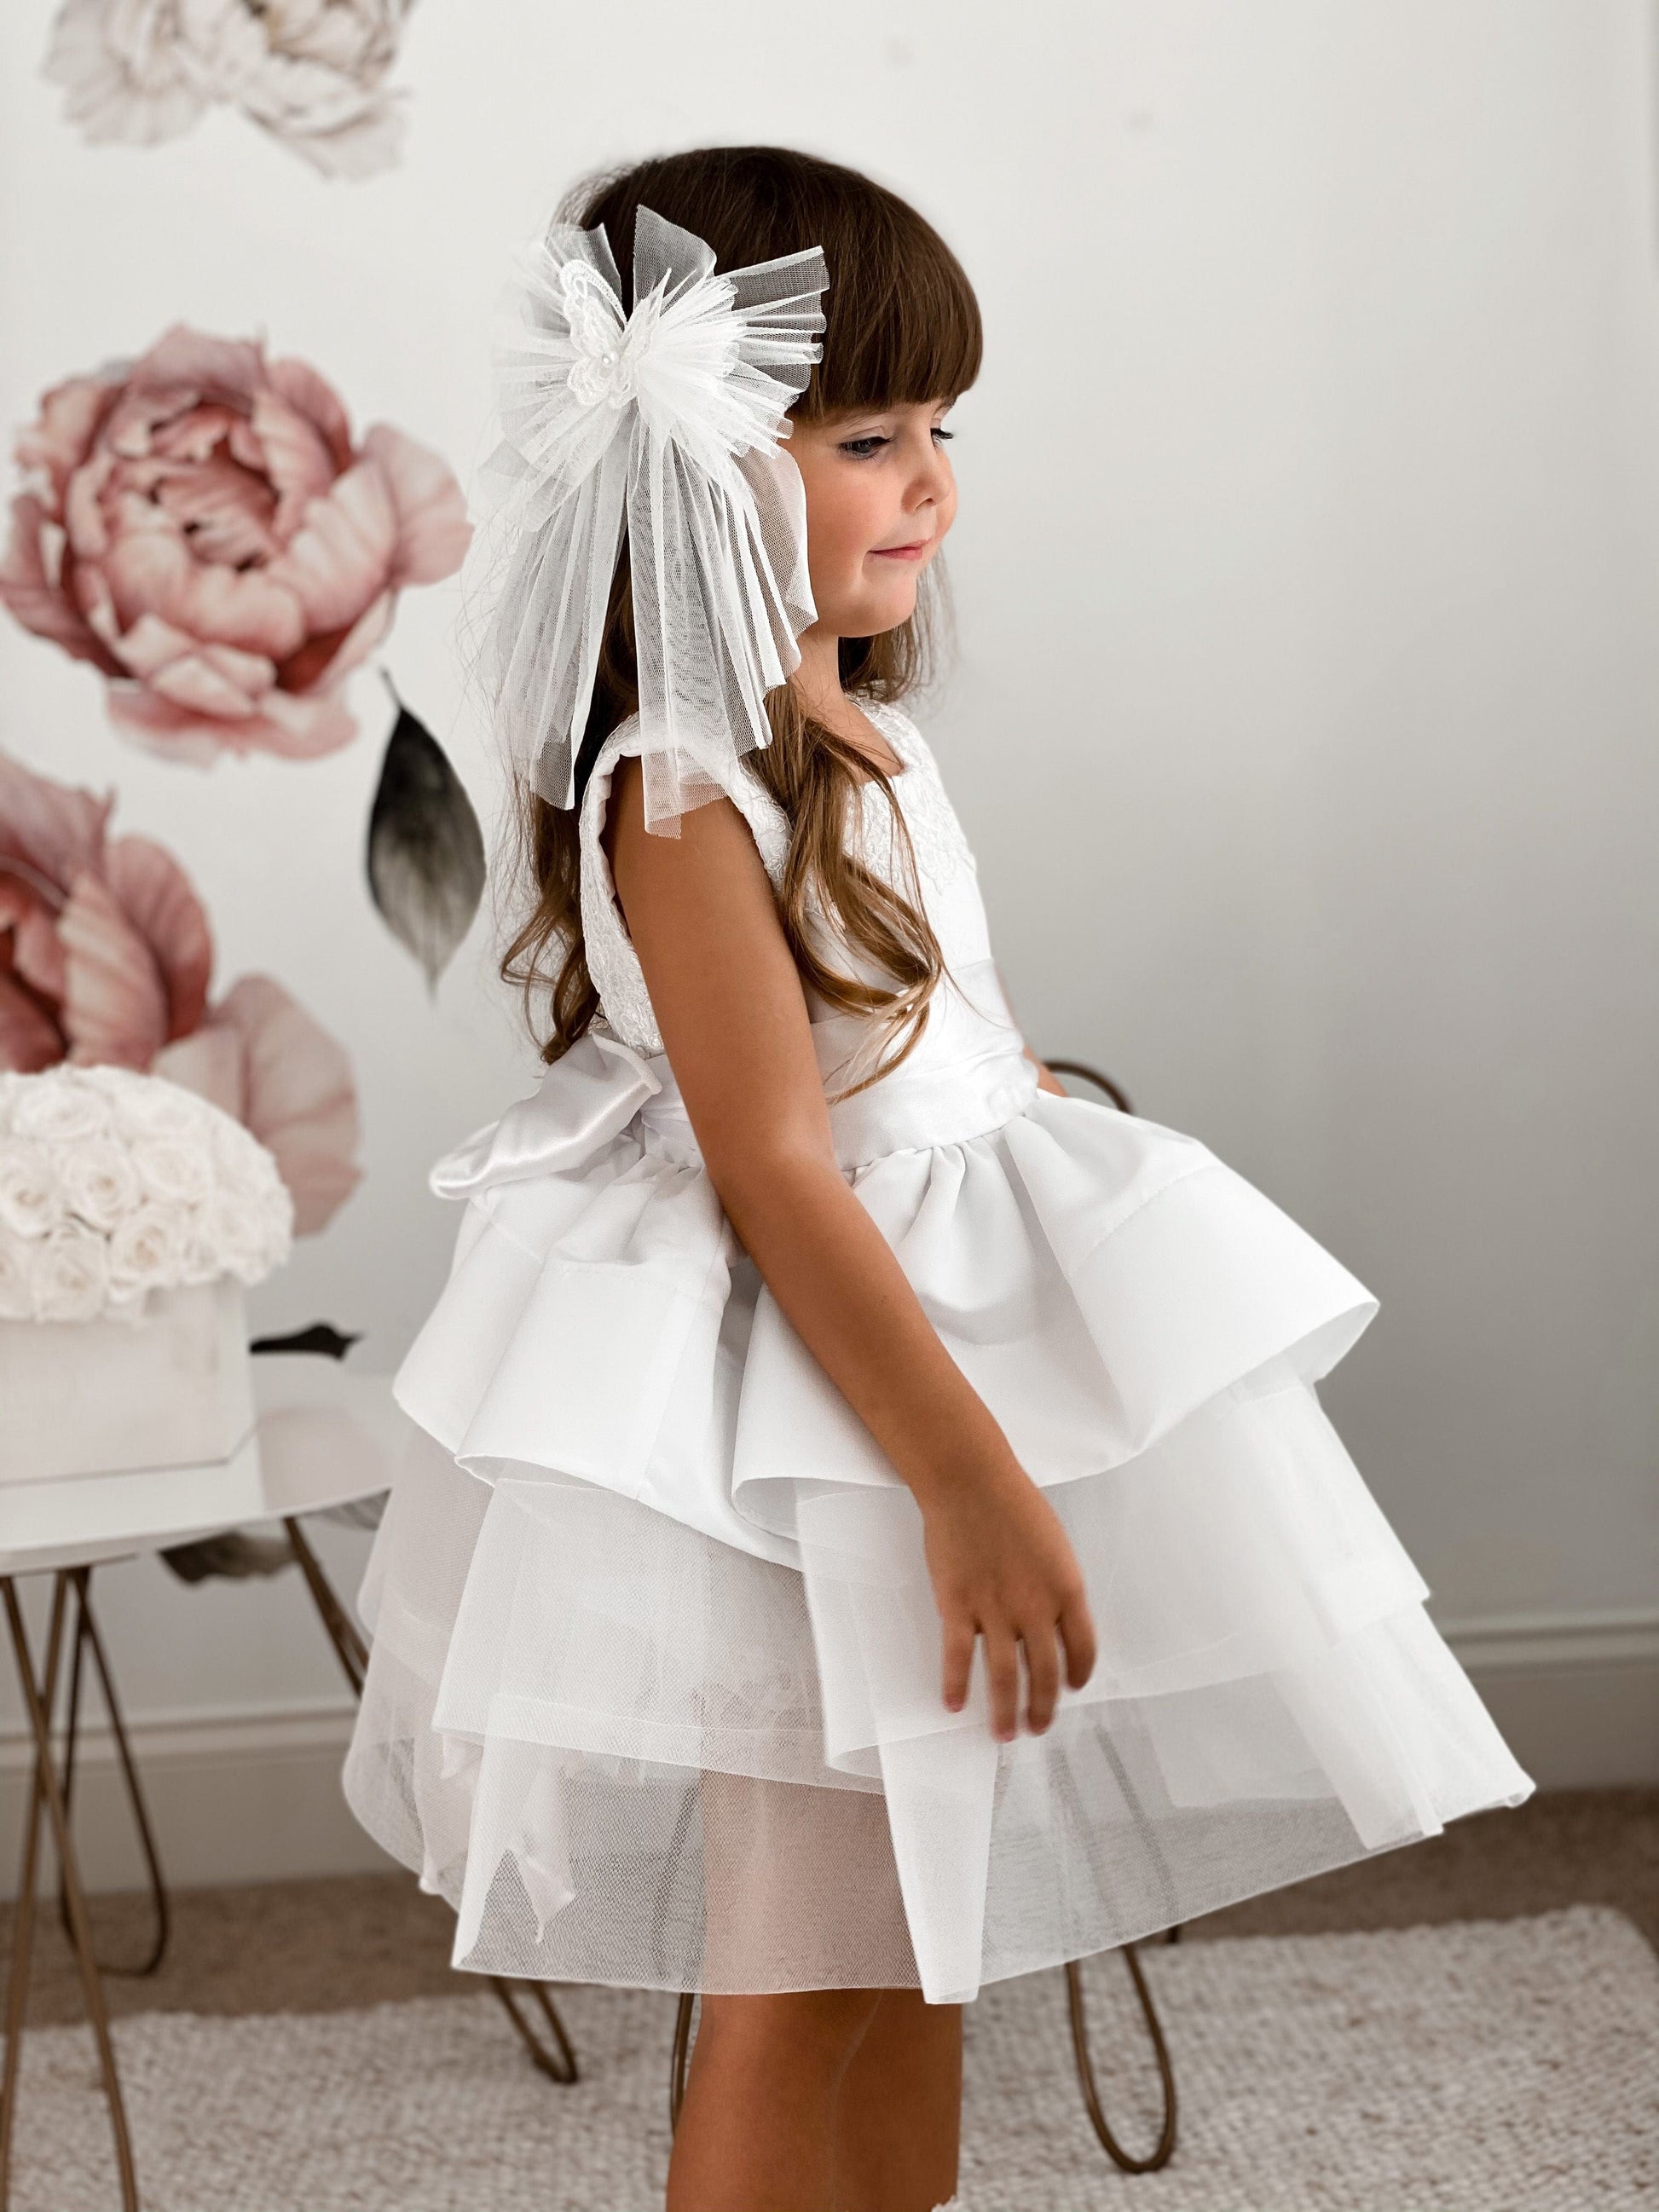 Butterfly Tulle Hair Bow - Petite Maison Kids